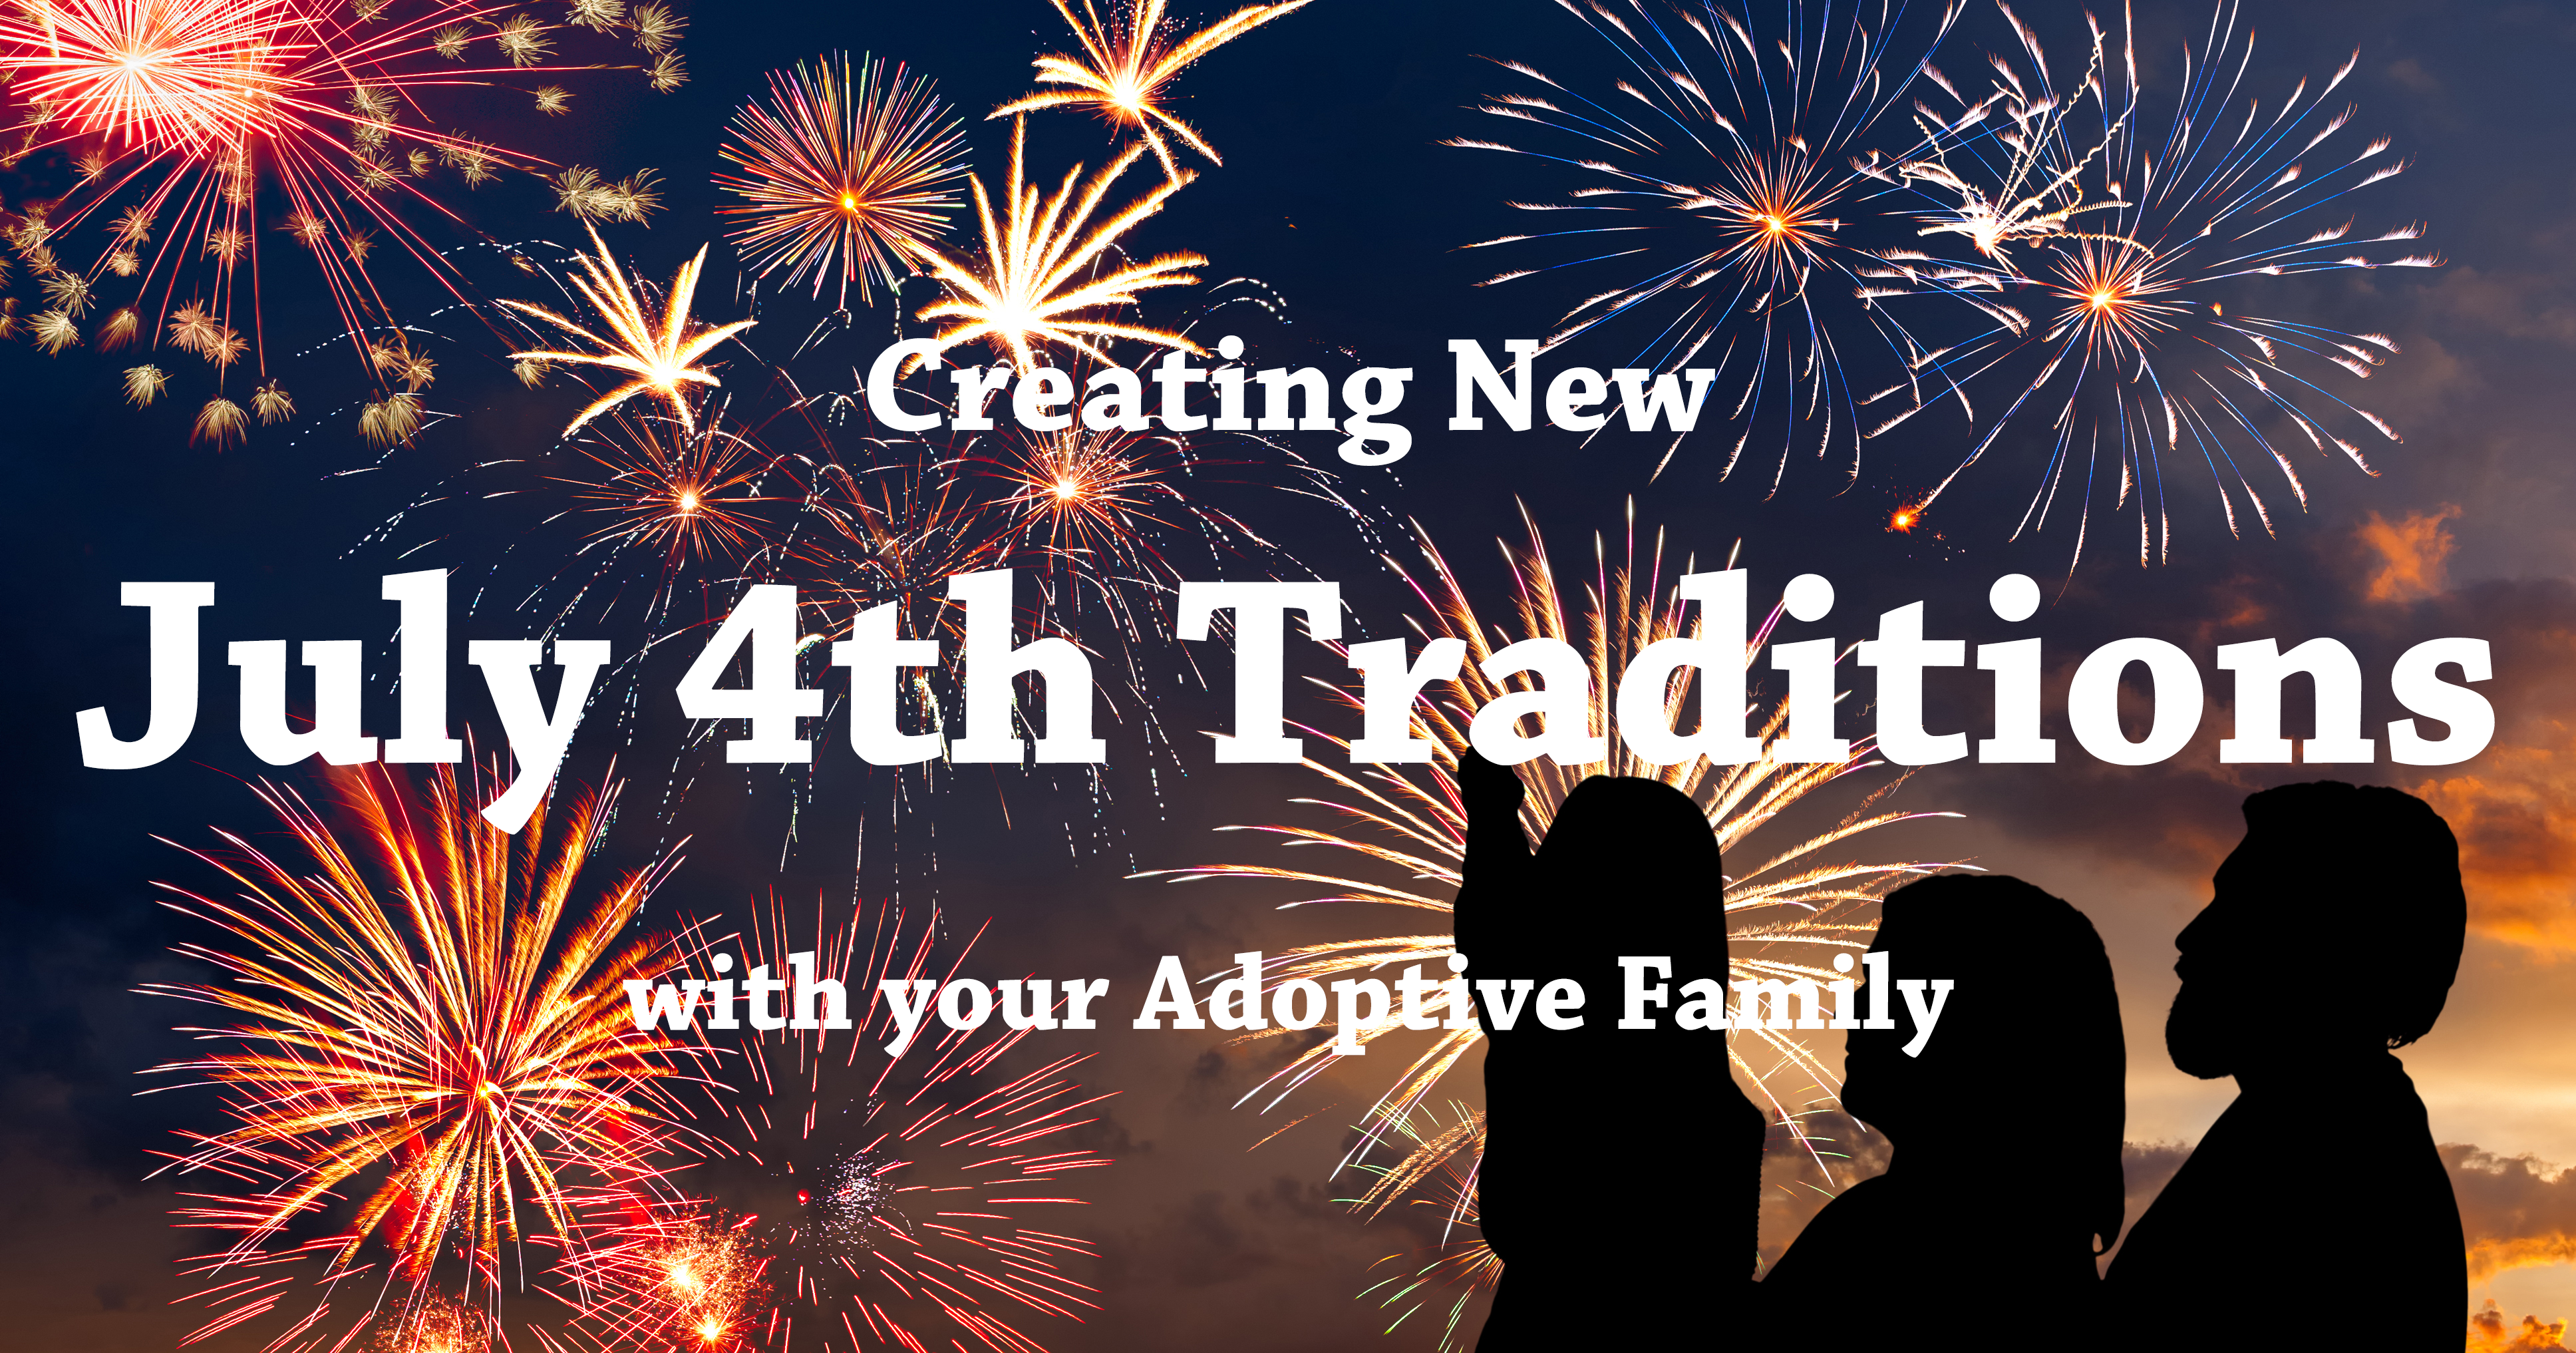 Creating New July 4th Traditions with your Adoptive Family